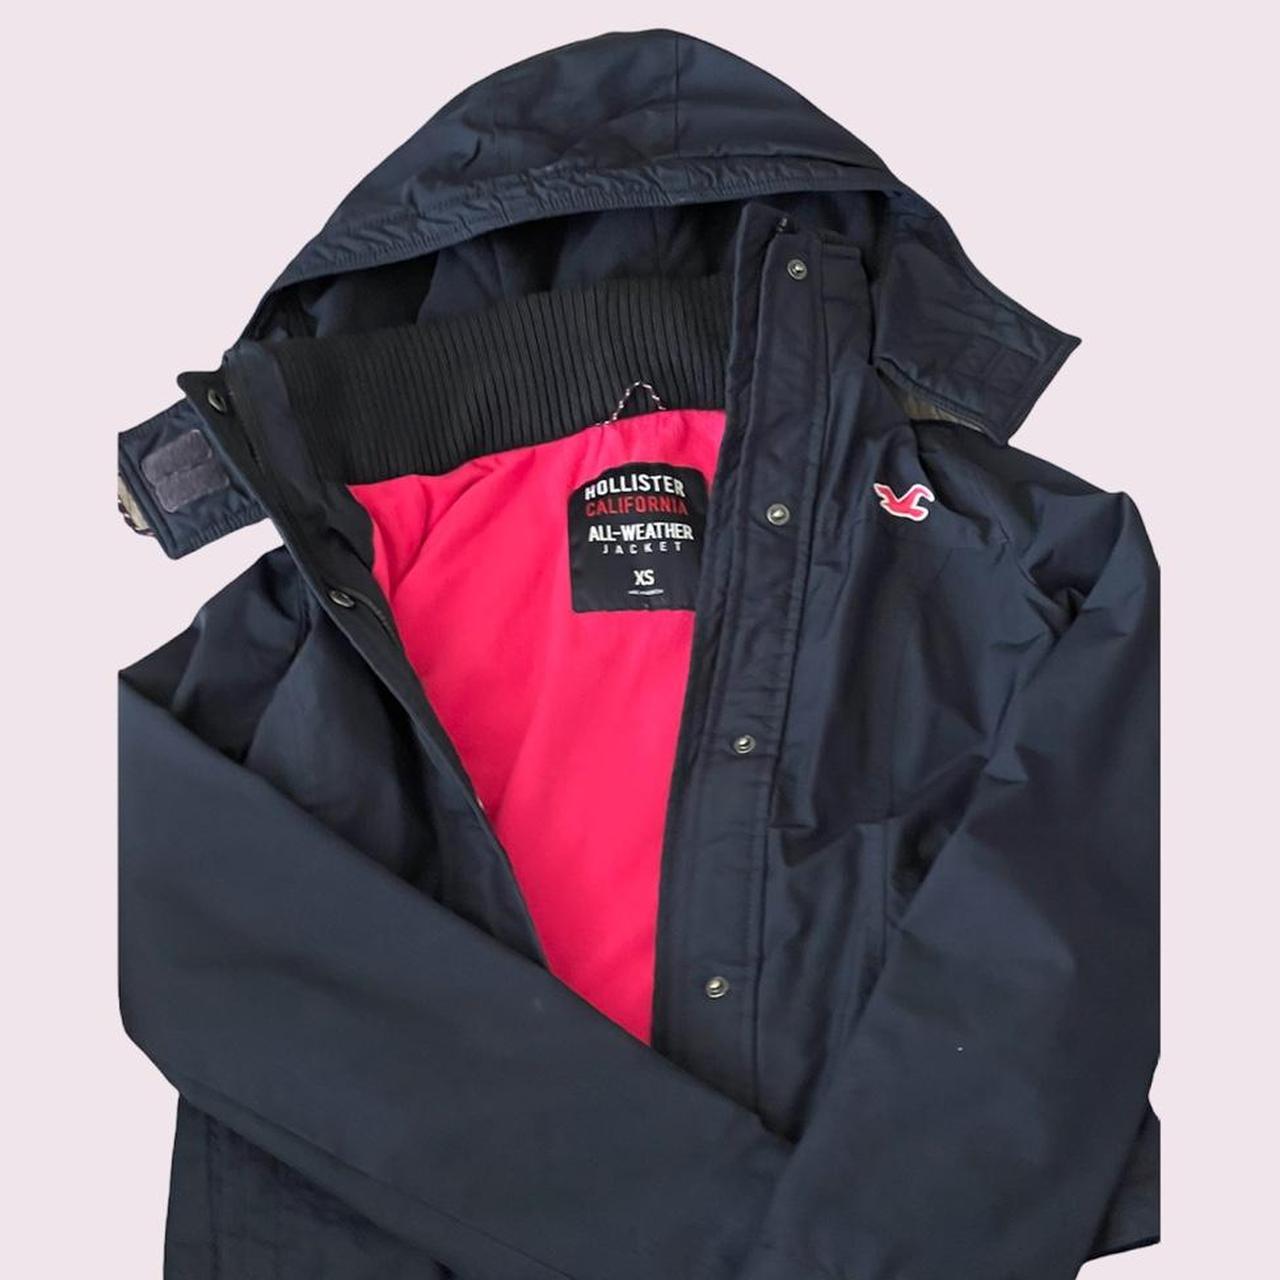 Hollister California All Weather Jacket  All weather jackets, Hollister  california, Clothes design